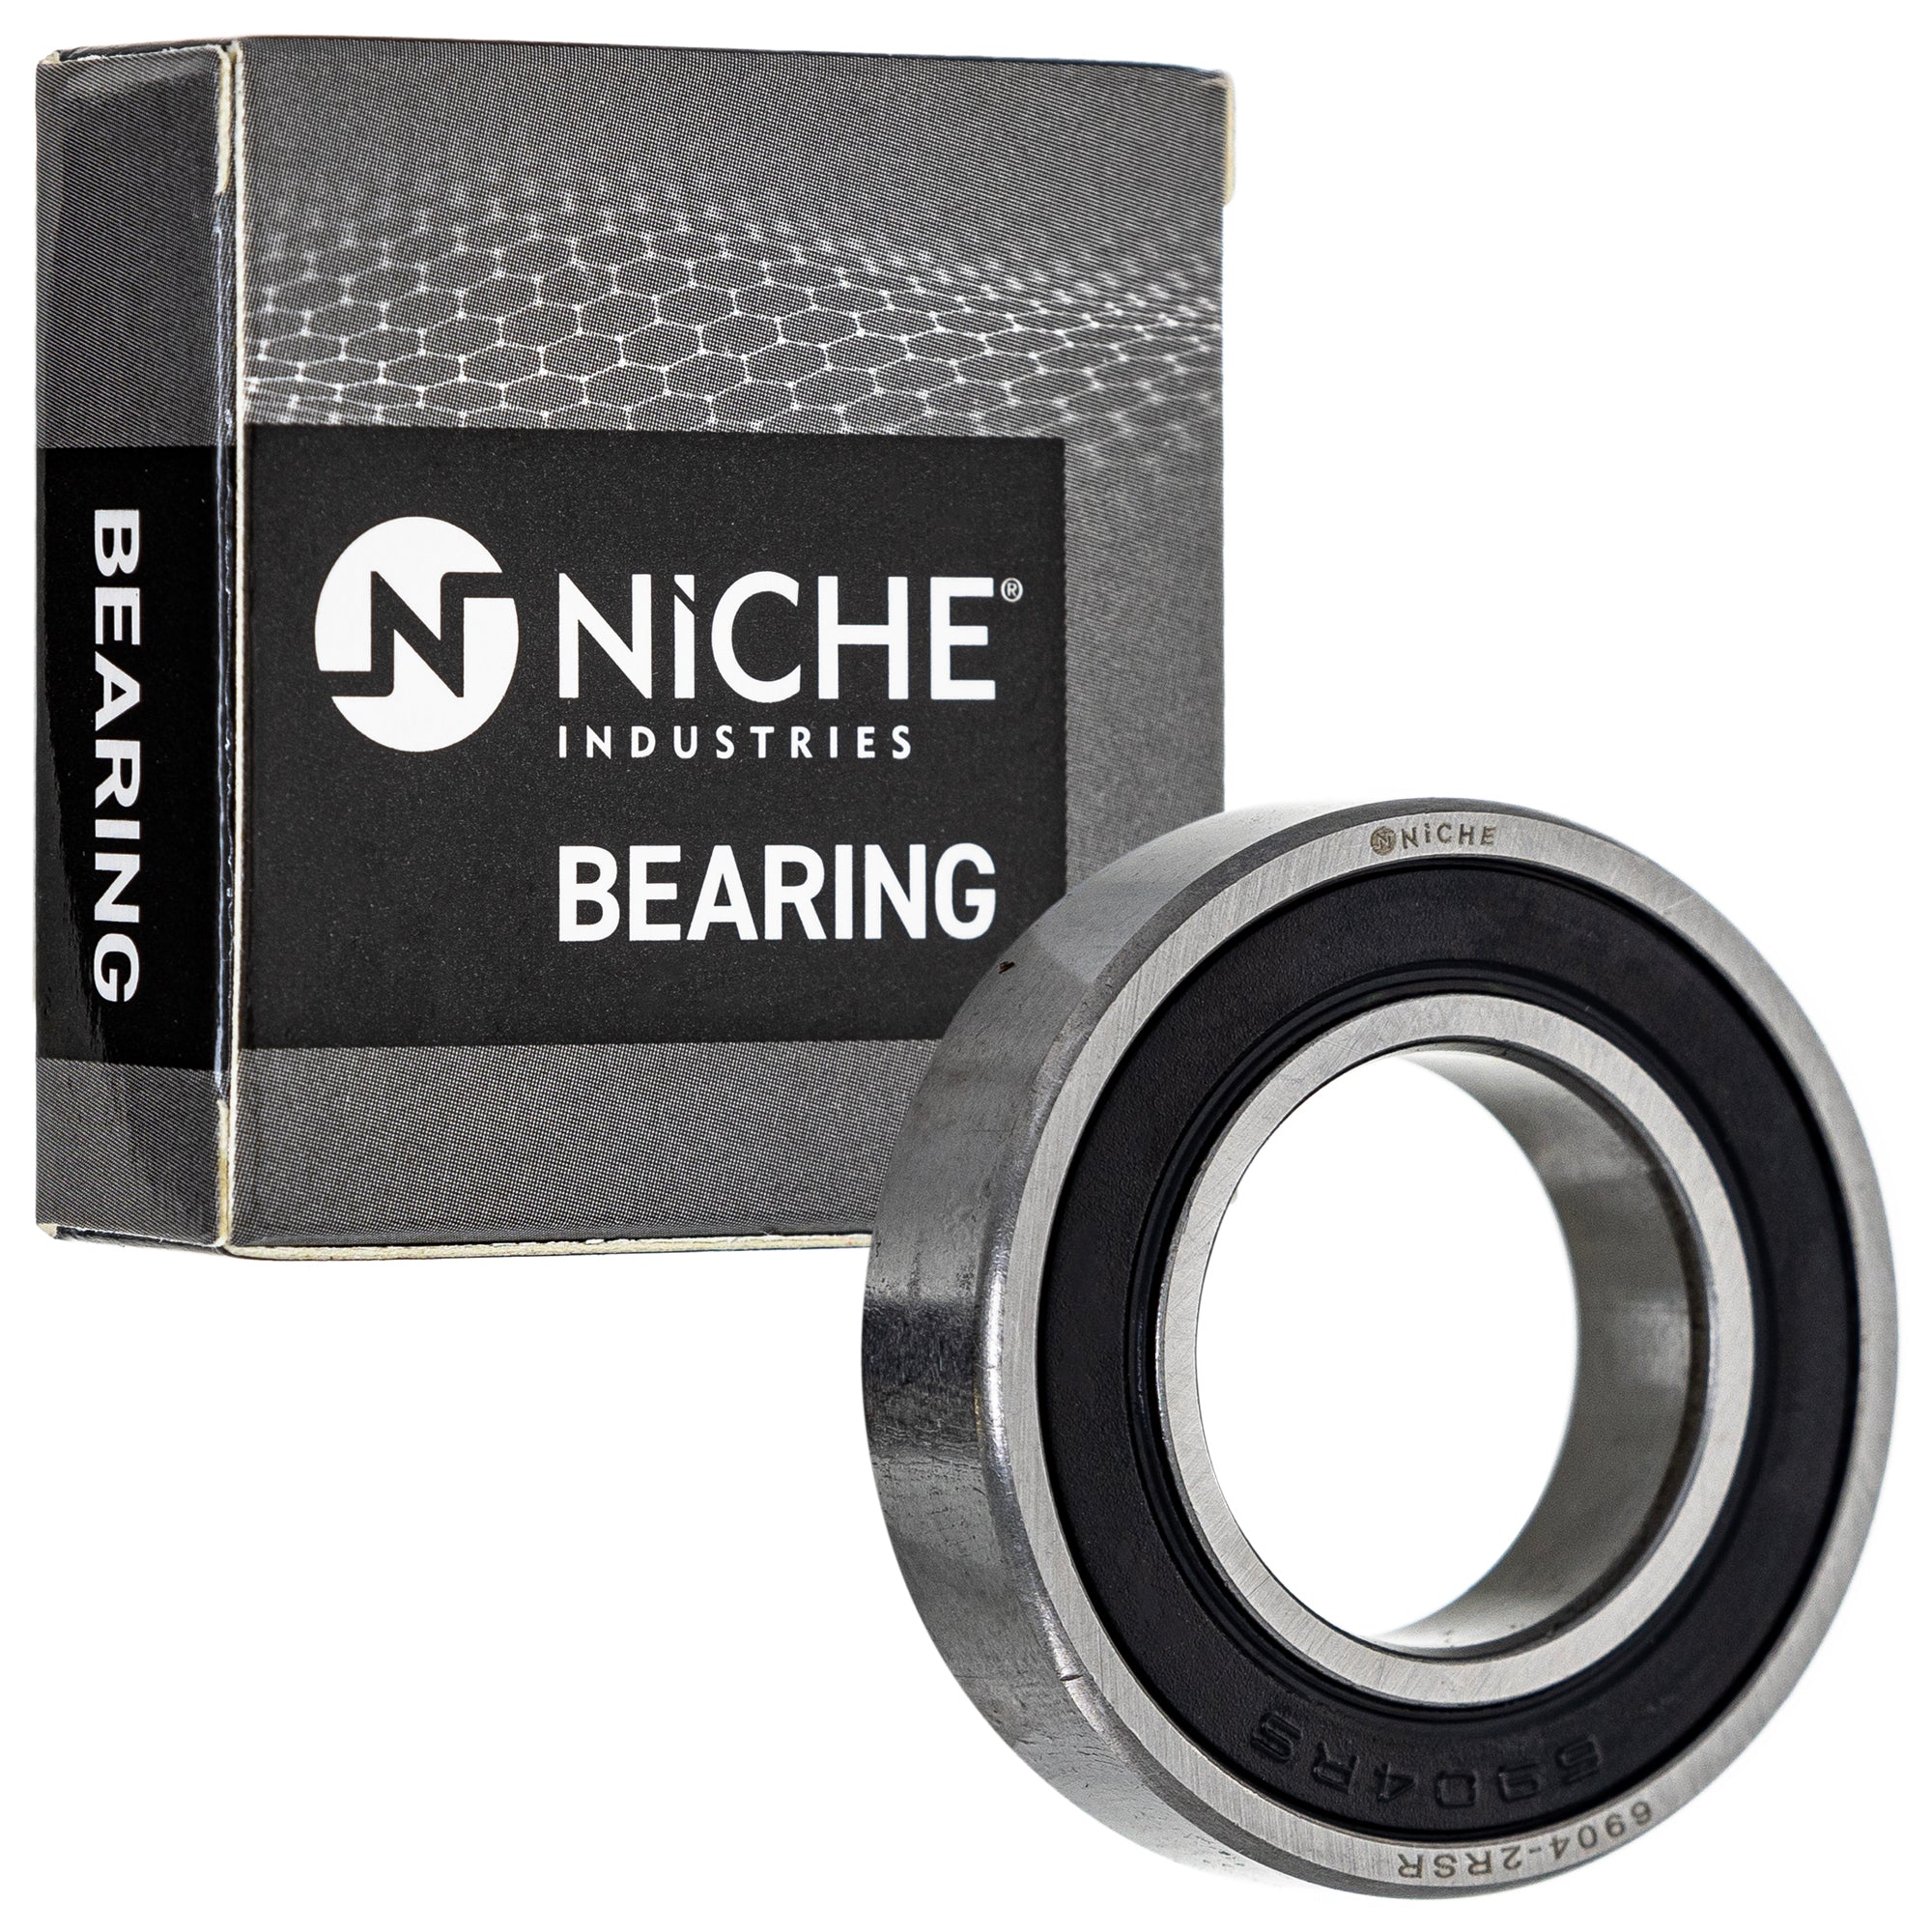 NICHE 519-CBB2287R Bearing 10-Pack for zOTHER WR450F WR426F WR400F